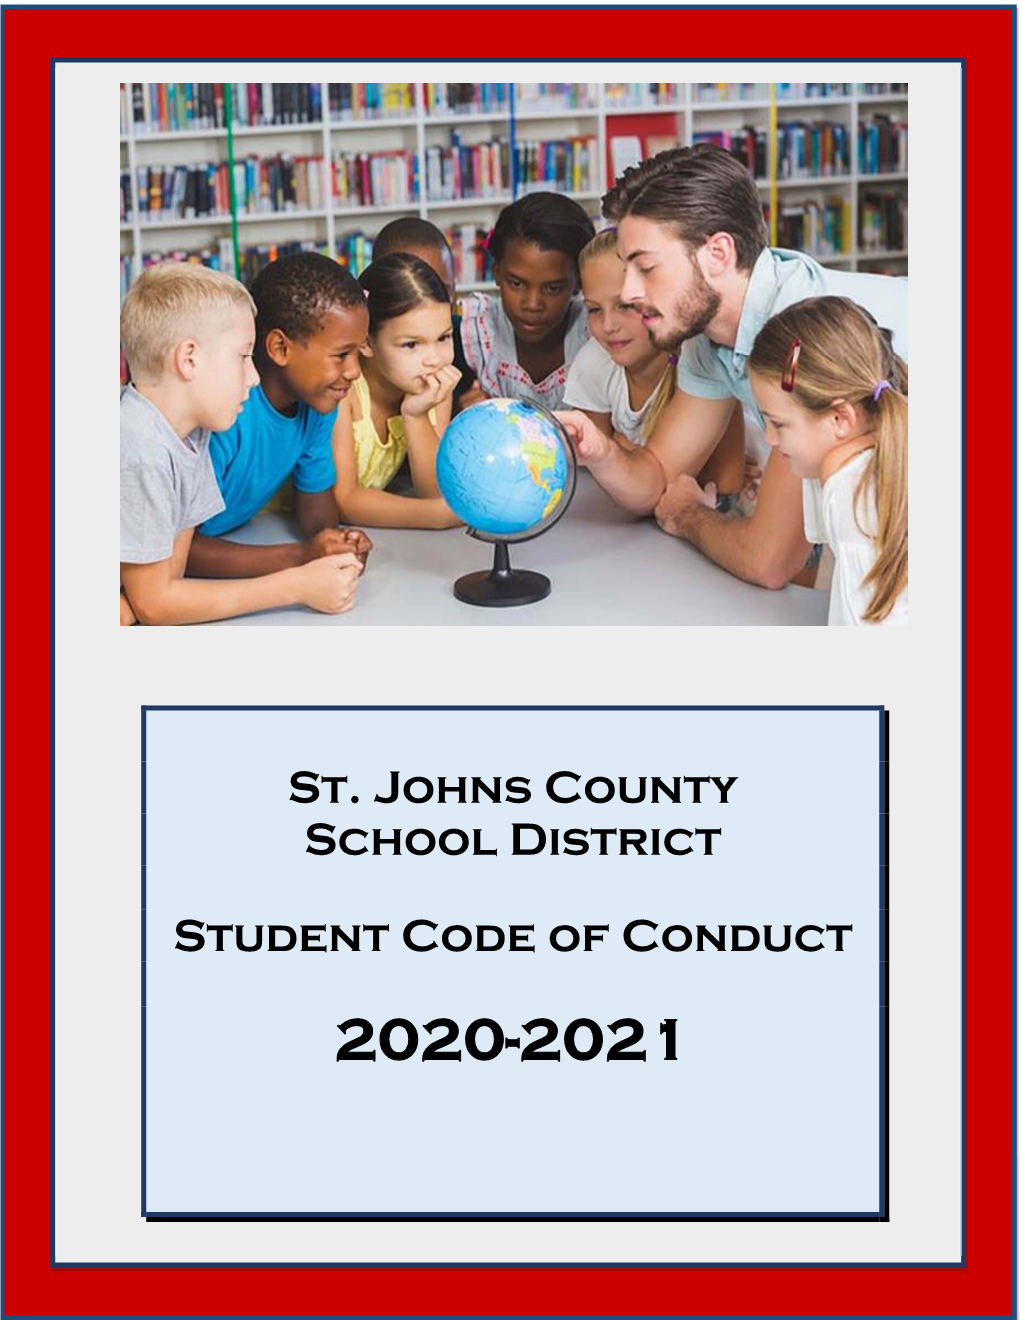 St. Johns County School District Student Code of Conduct